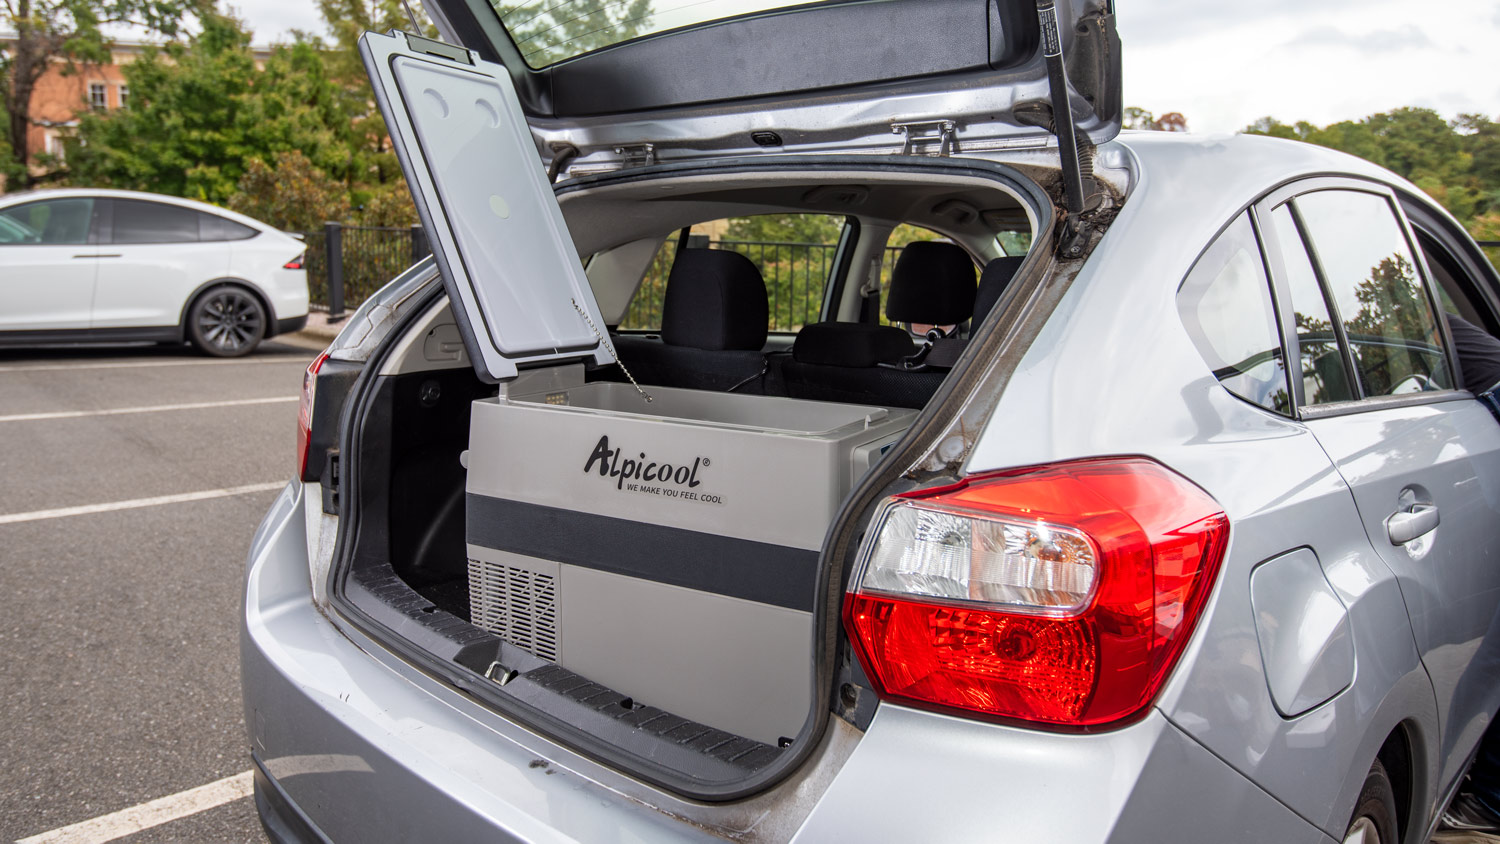 An open Alpicool 12V cooler sits in the open truck of a car